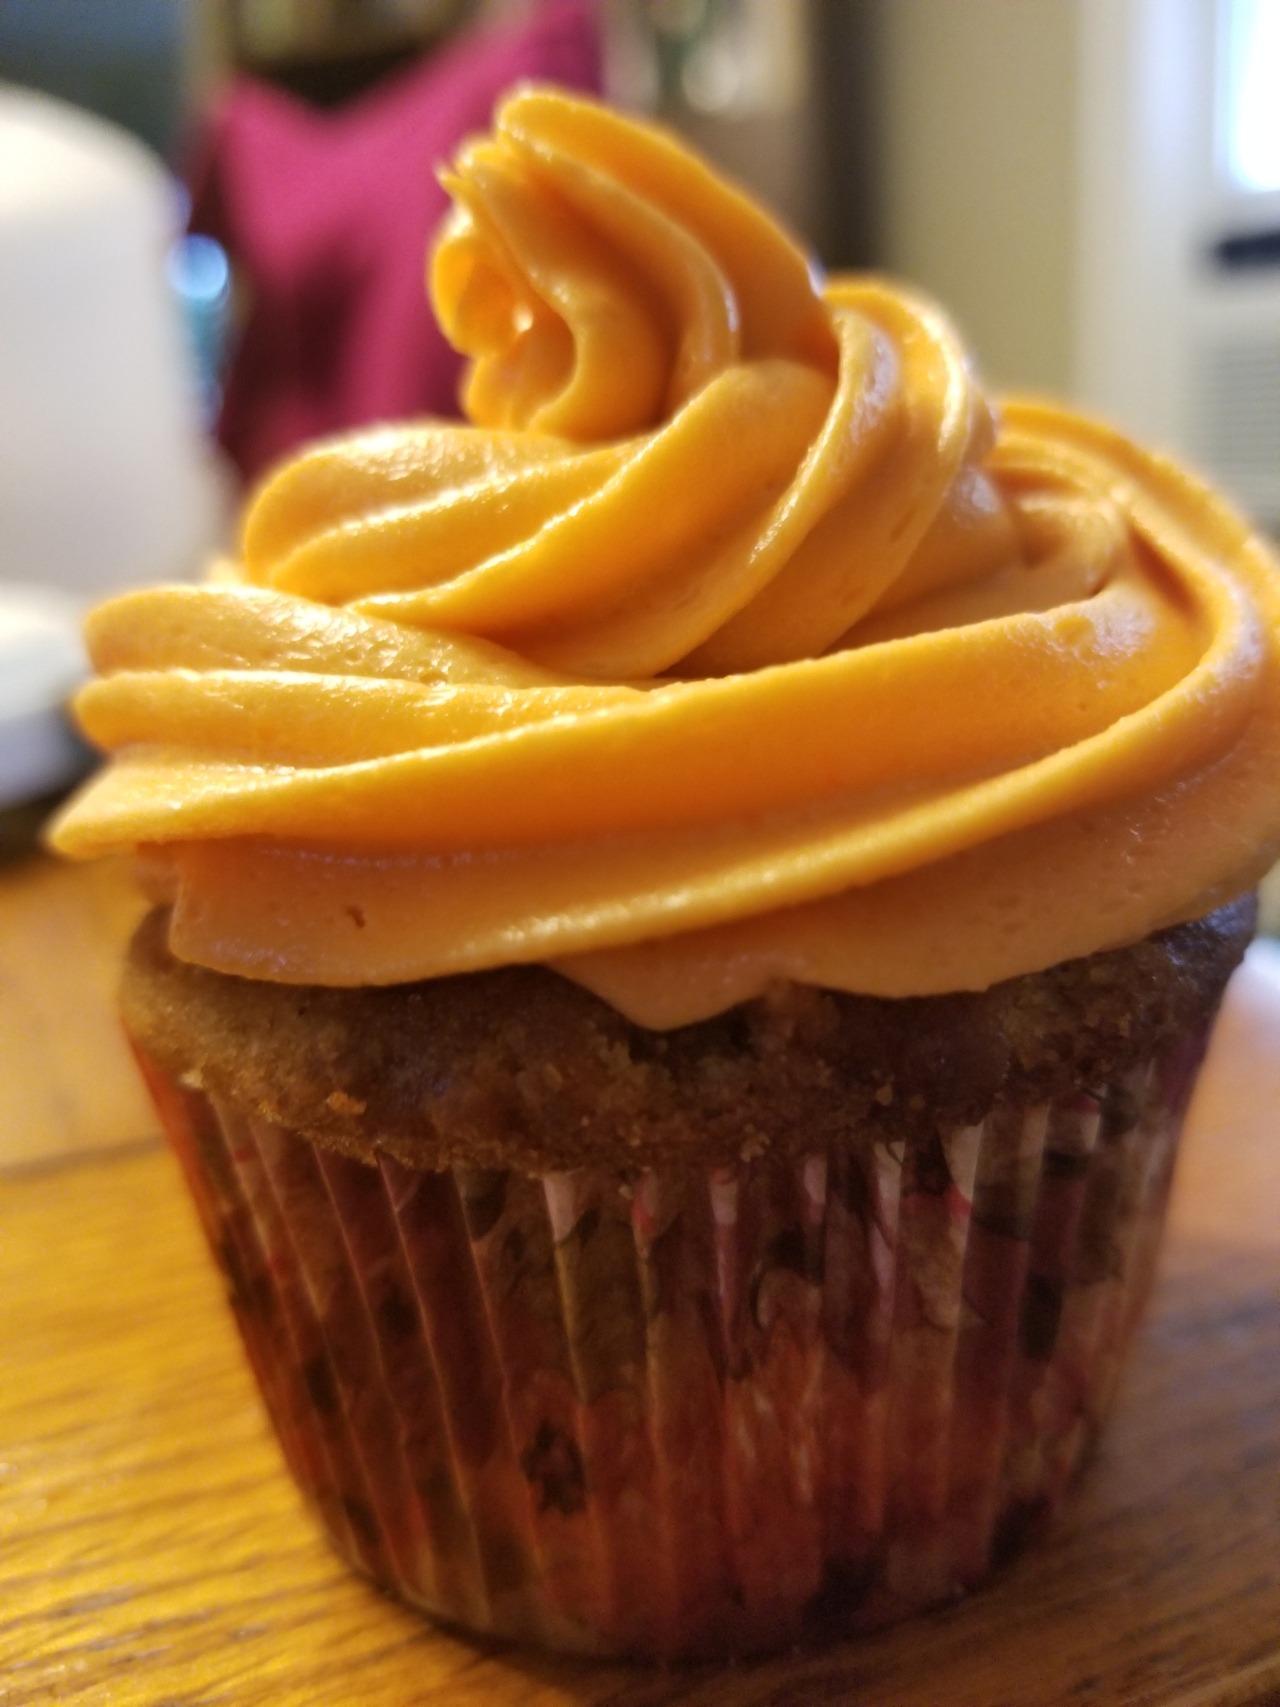 Homemade Apple Cinnamon Cupcakes with Apple Cider Frosting for a Harvest Moon Dessert